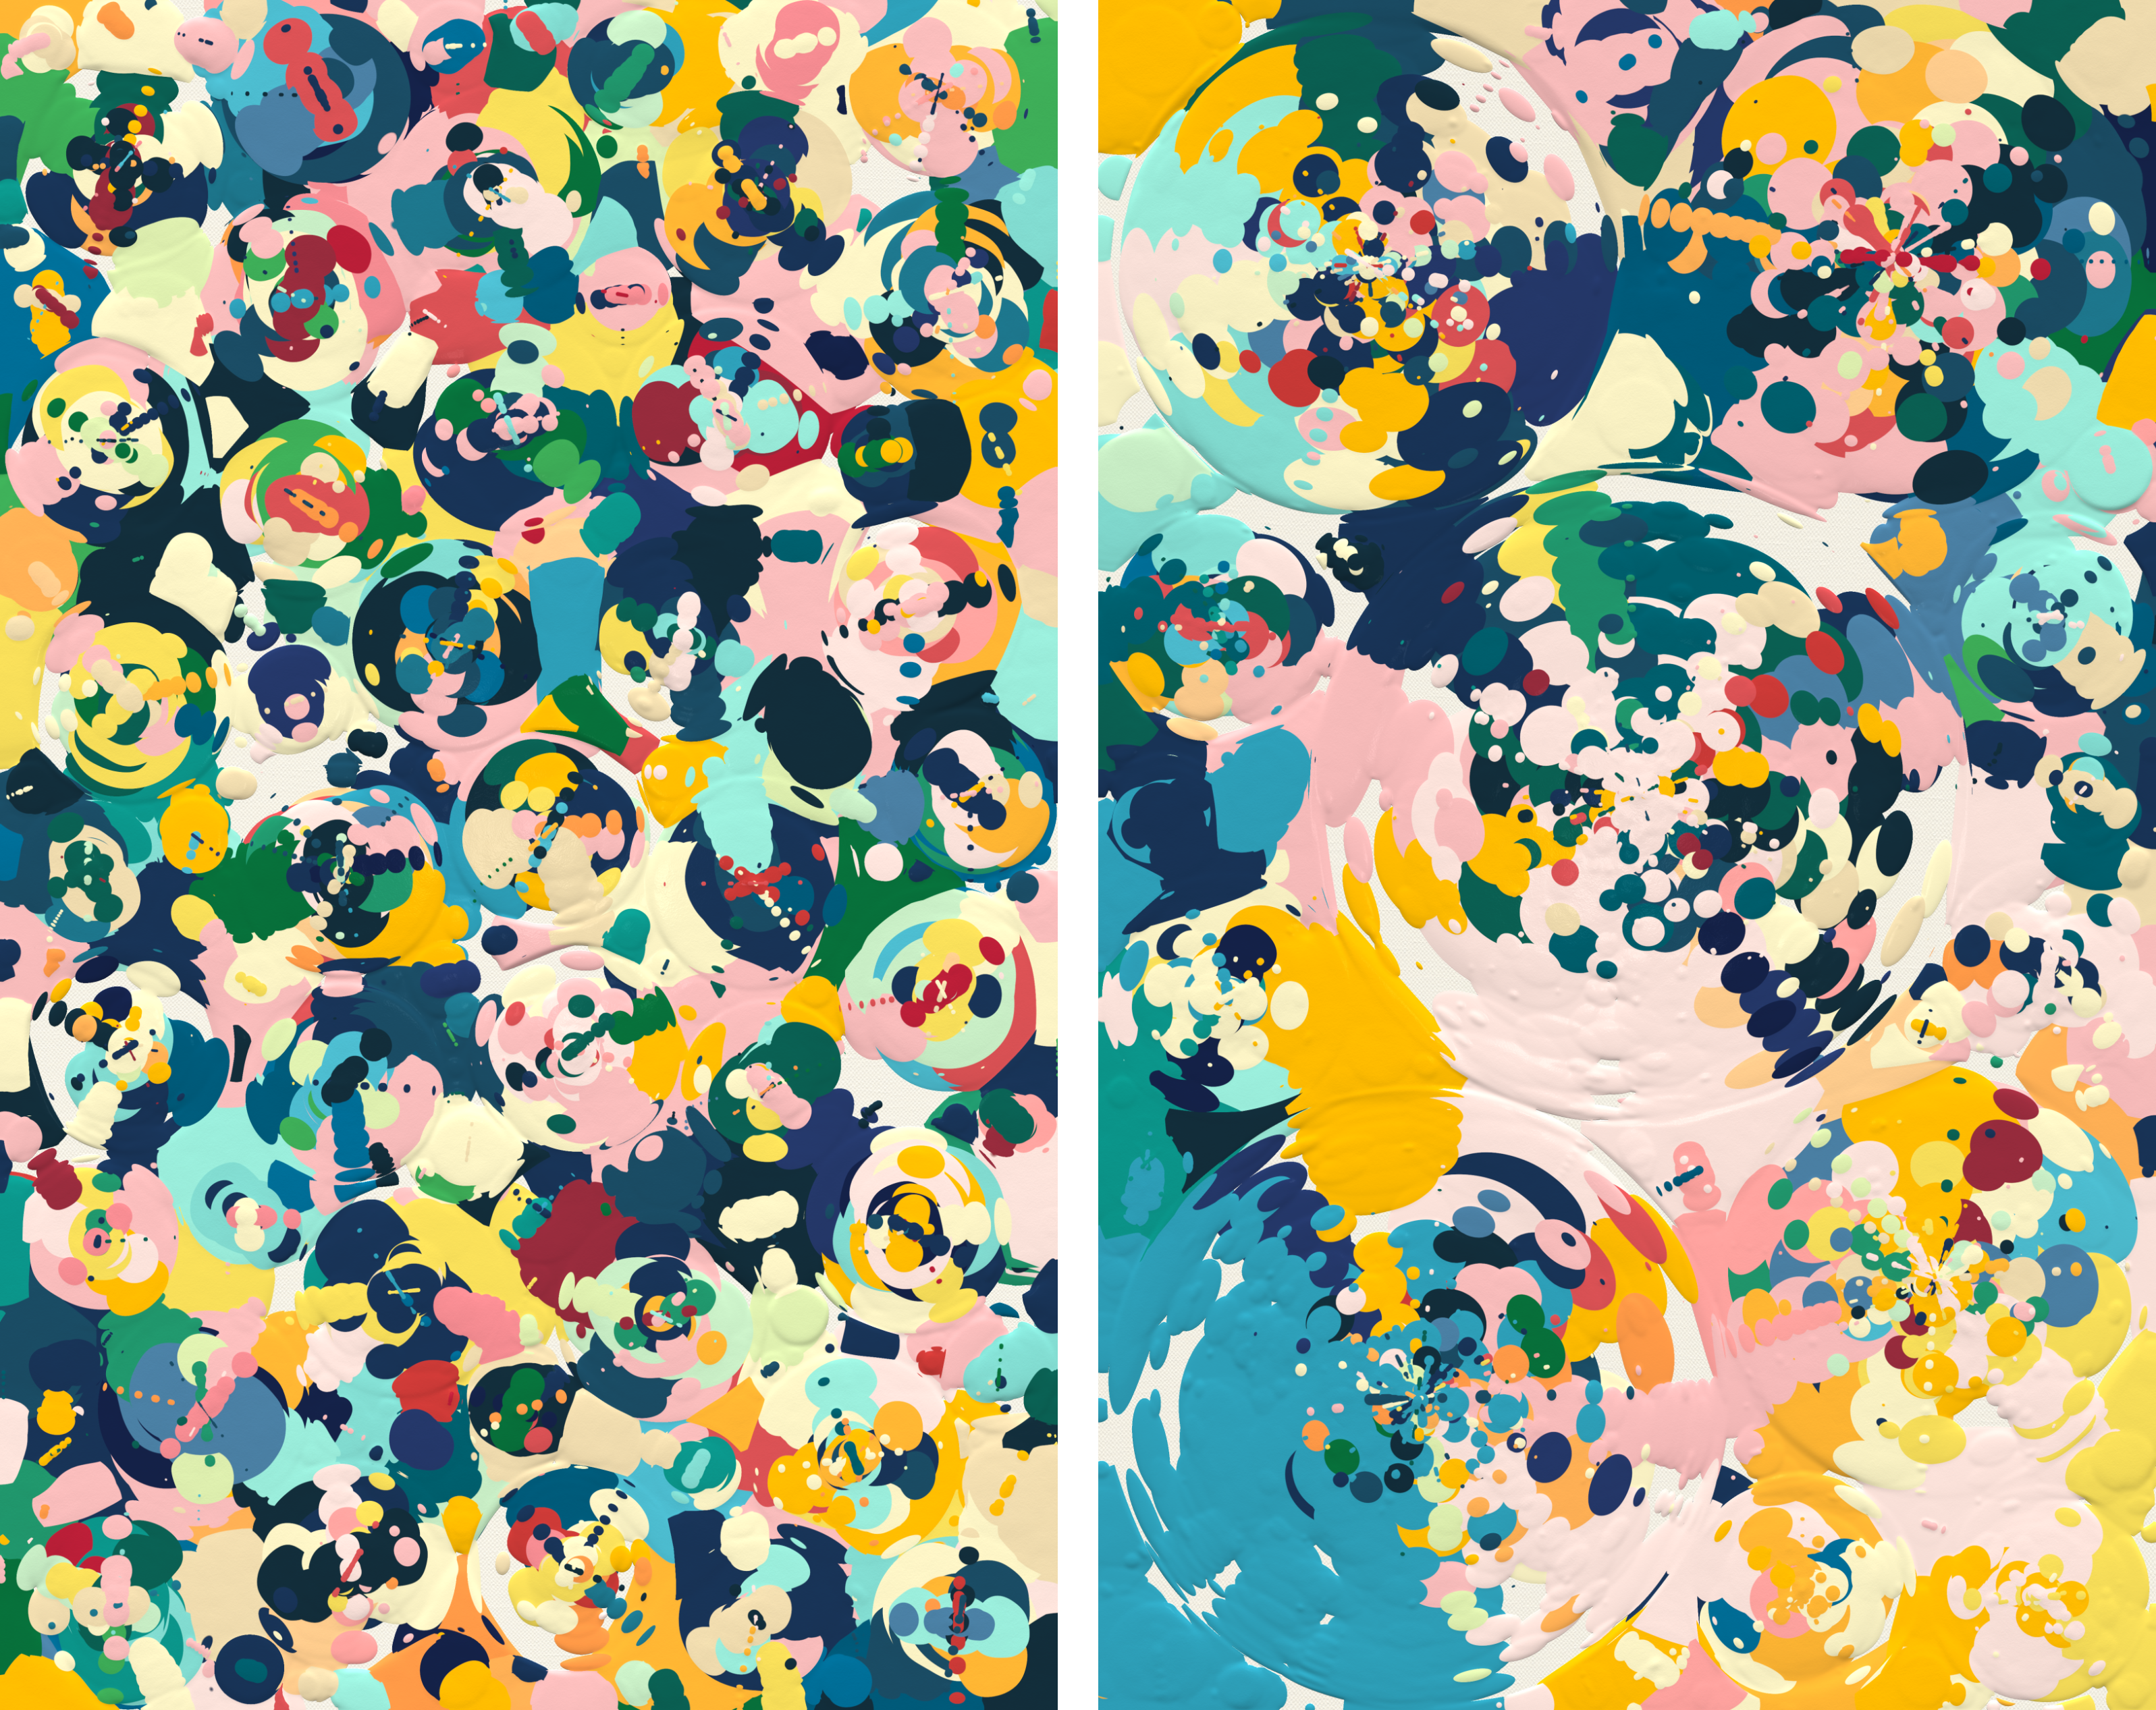 Variety within each style, ft. Mixed Oils palette in Superbloom style